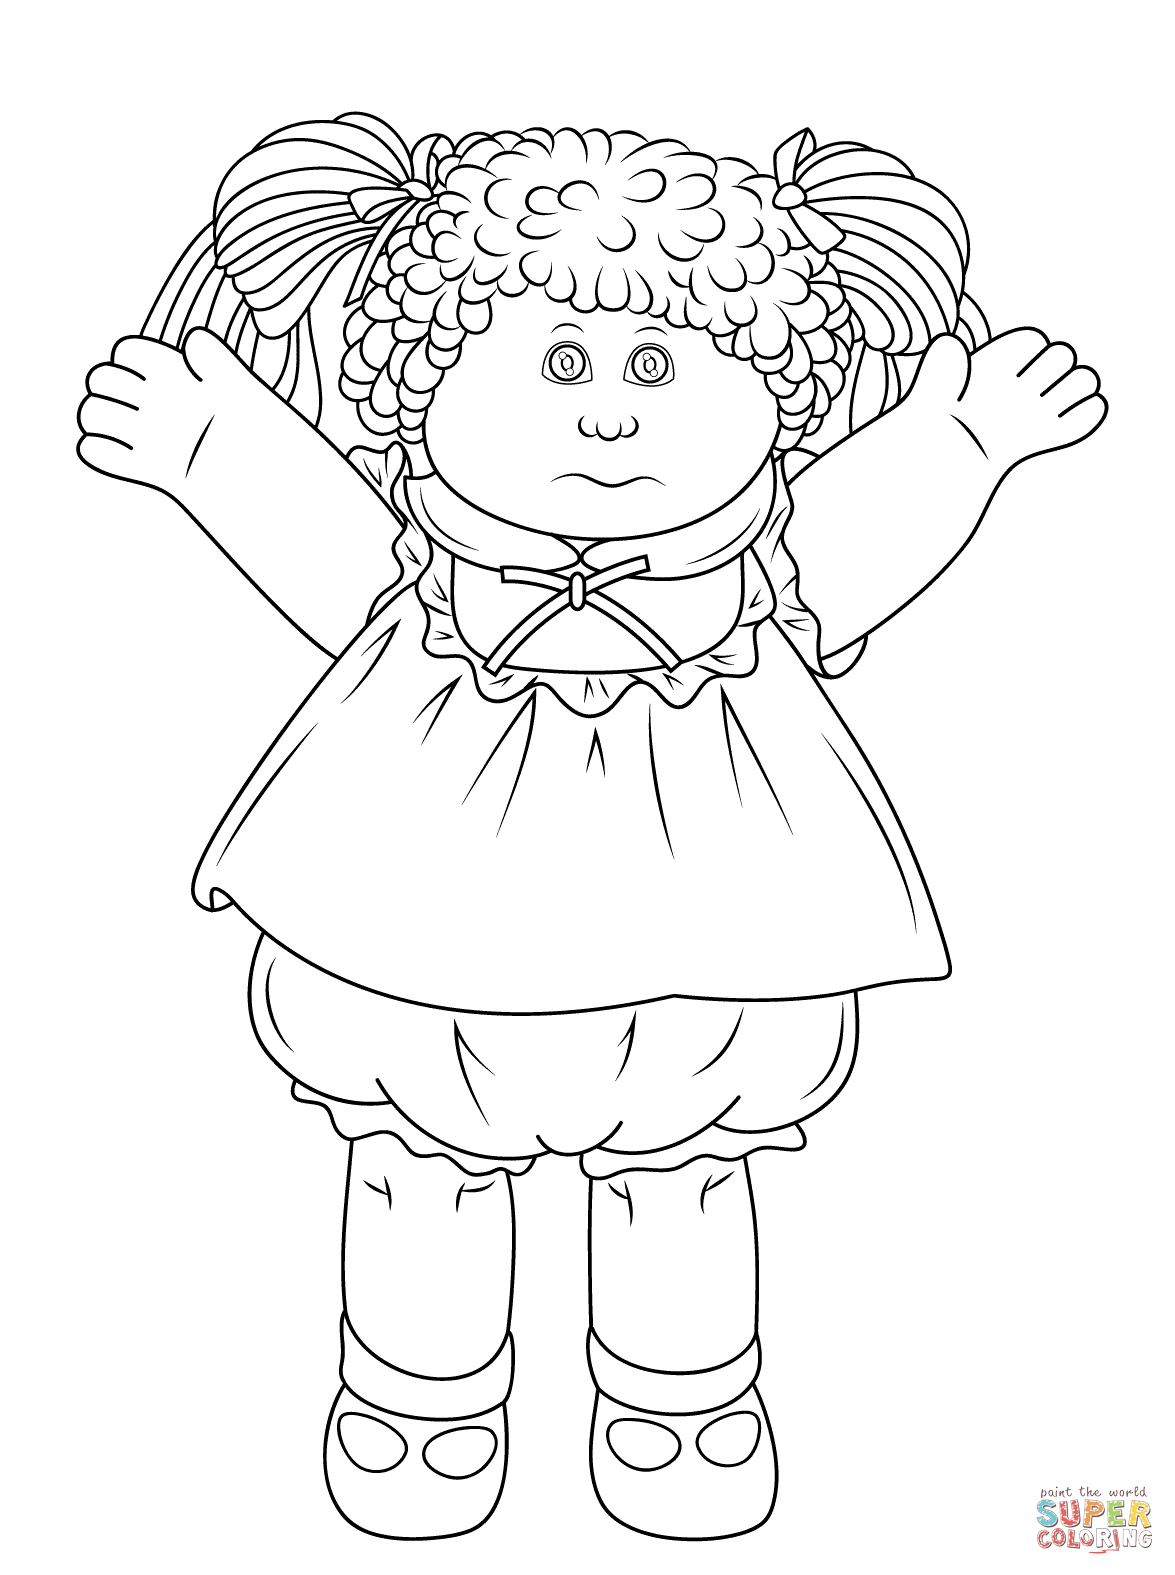 Cabbage Patch Doll coloring page | Free Printable Coloring Pages